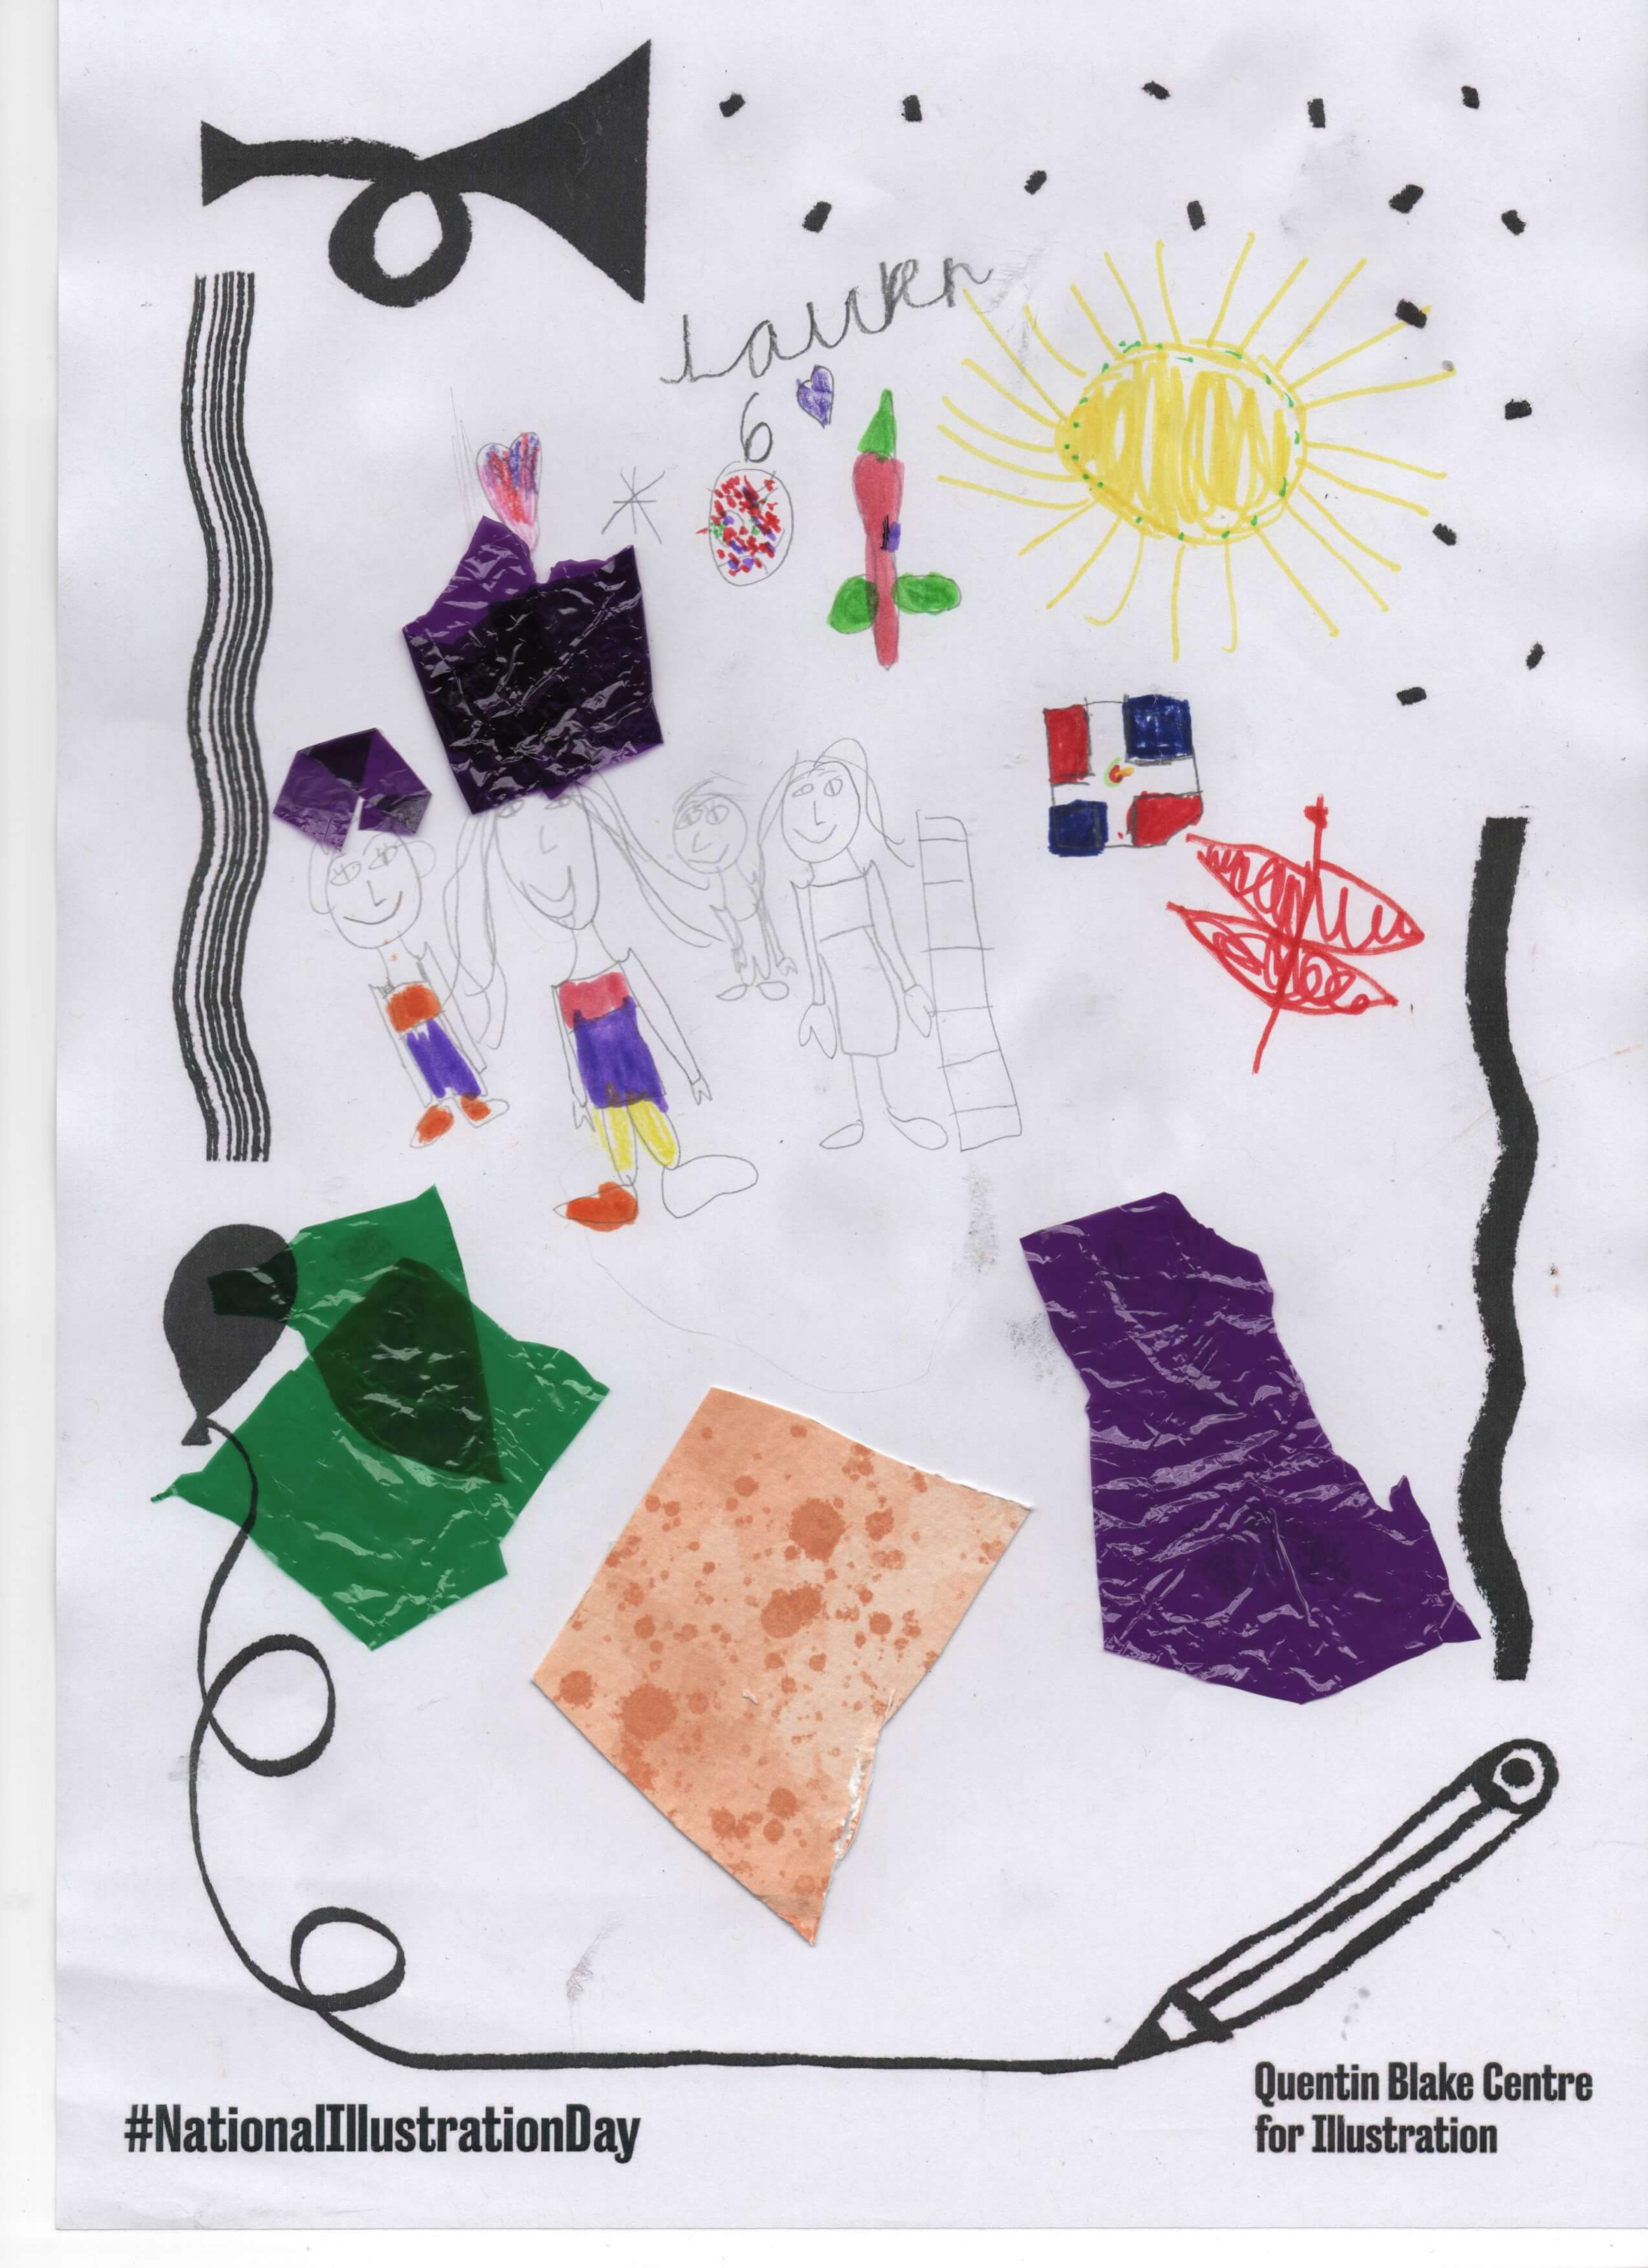 A young child's drawing of a smiling group of people under a bright yellow sun, with collaged blocks of paper.